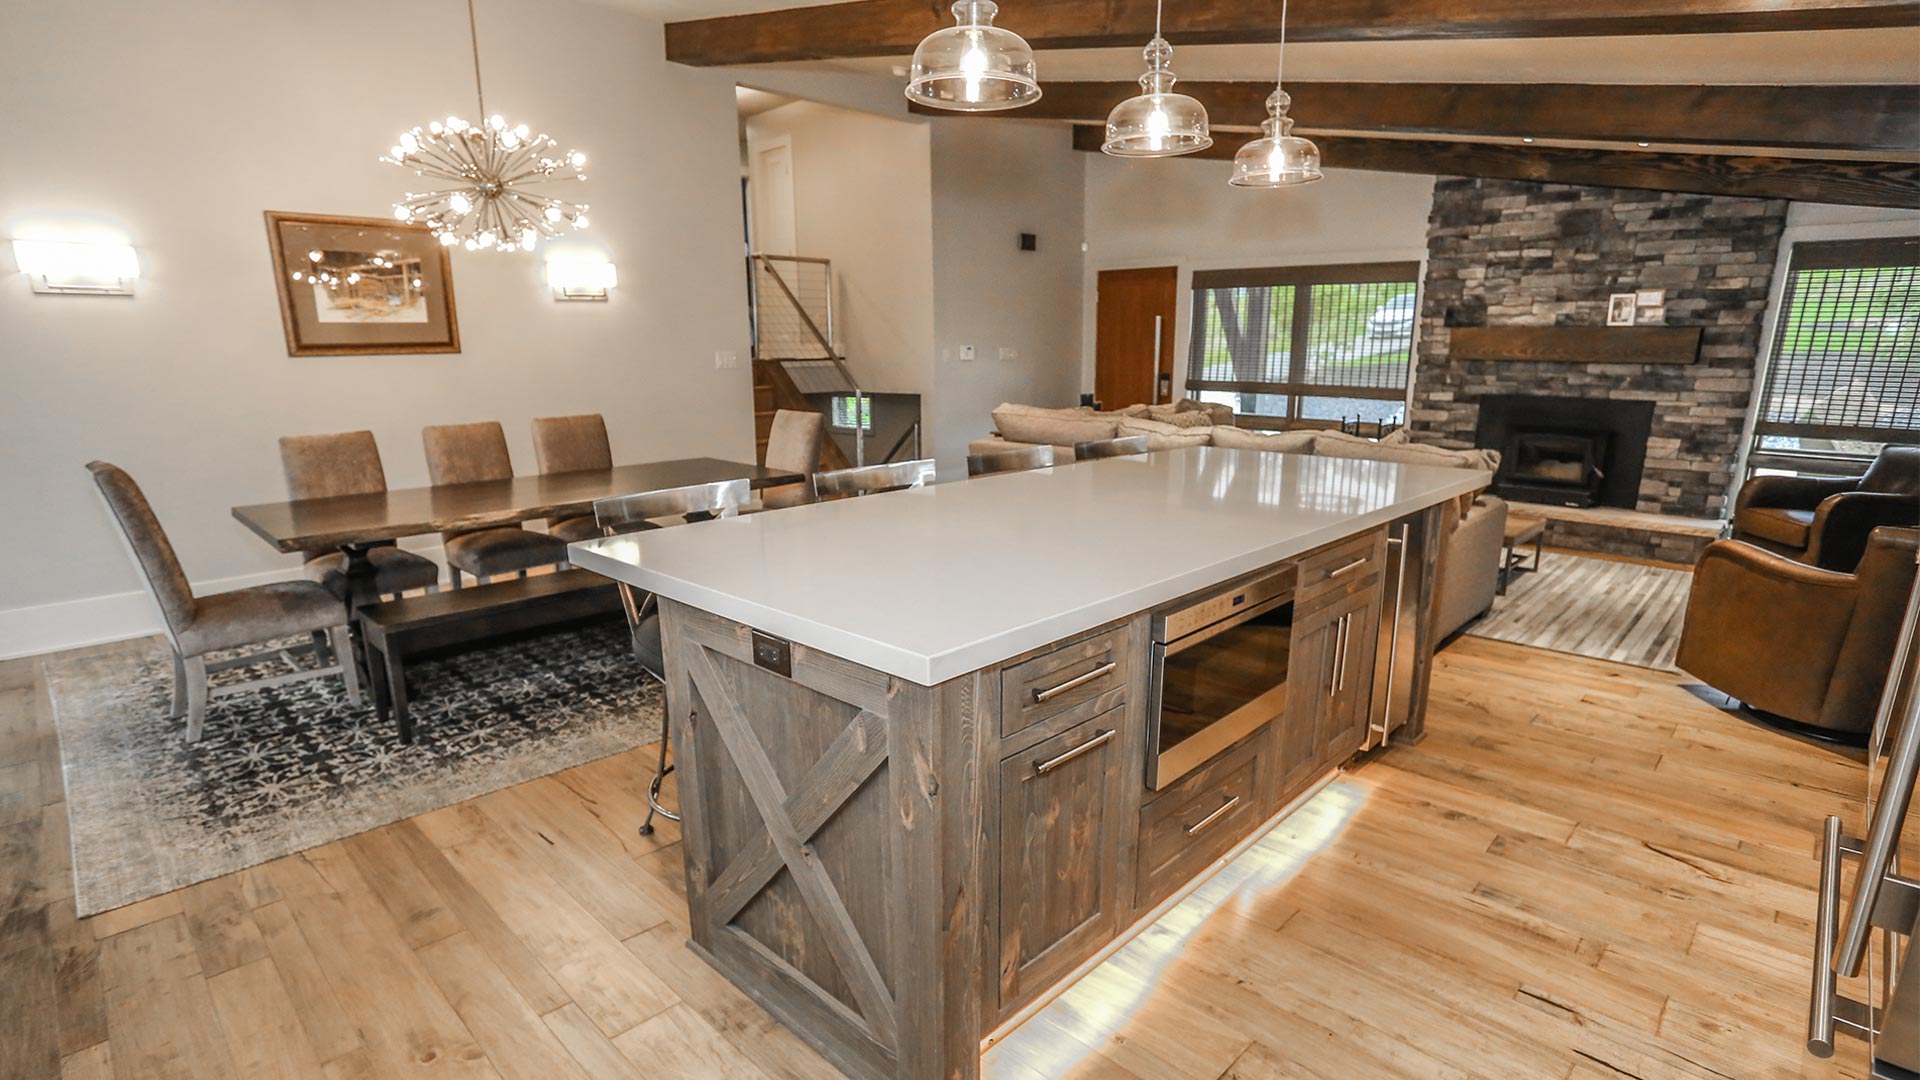 detail shot of the kitchen island. The island is styled in a country style with gray wood and sleek gray countertop. There are chairs for dining on one side of the island and appliances and storage space on the other.